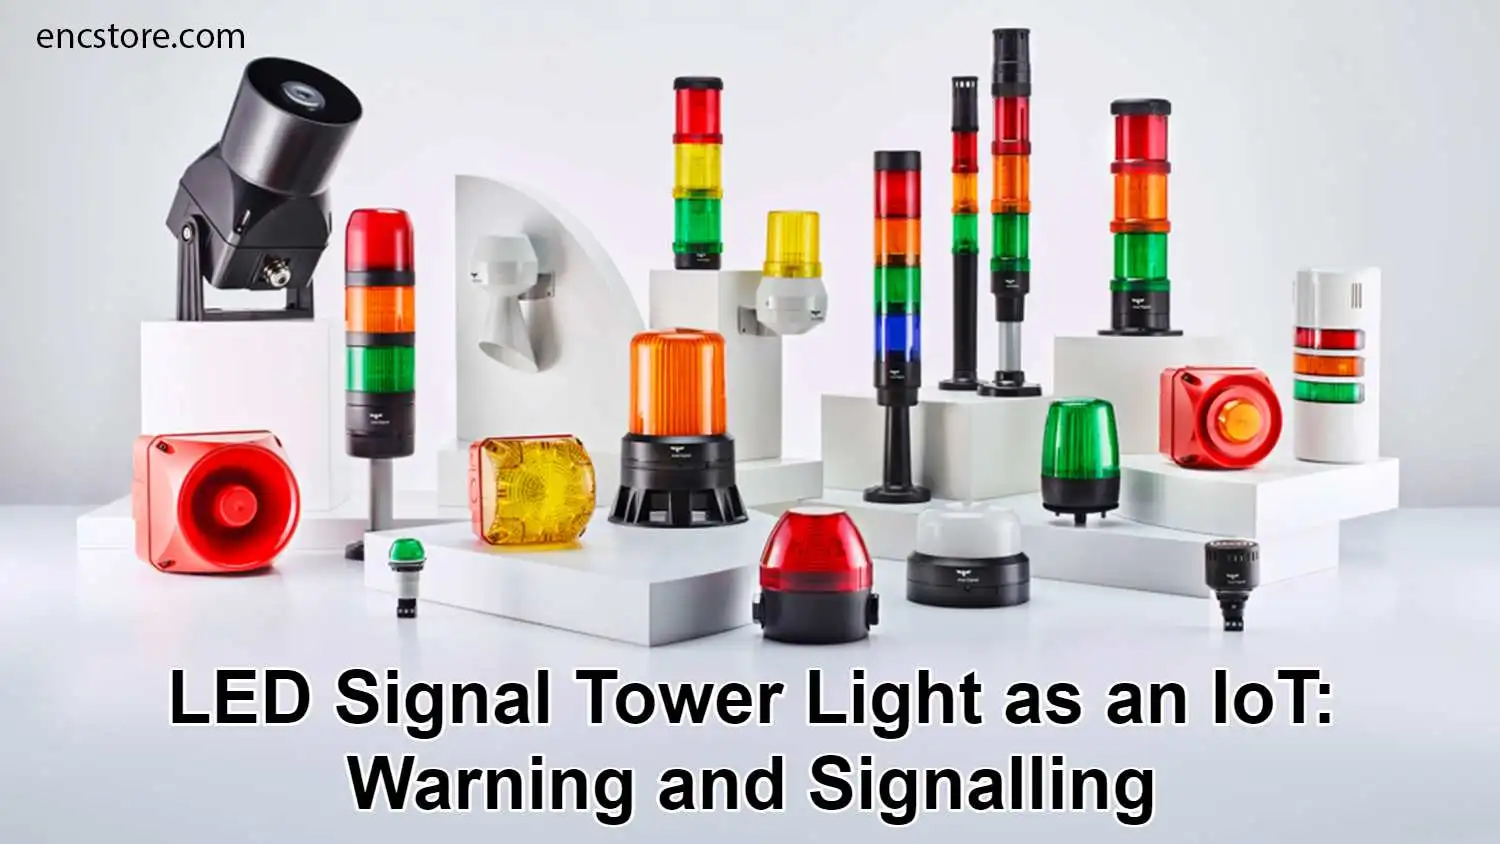 LED Signal Tower Light as an IoT